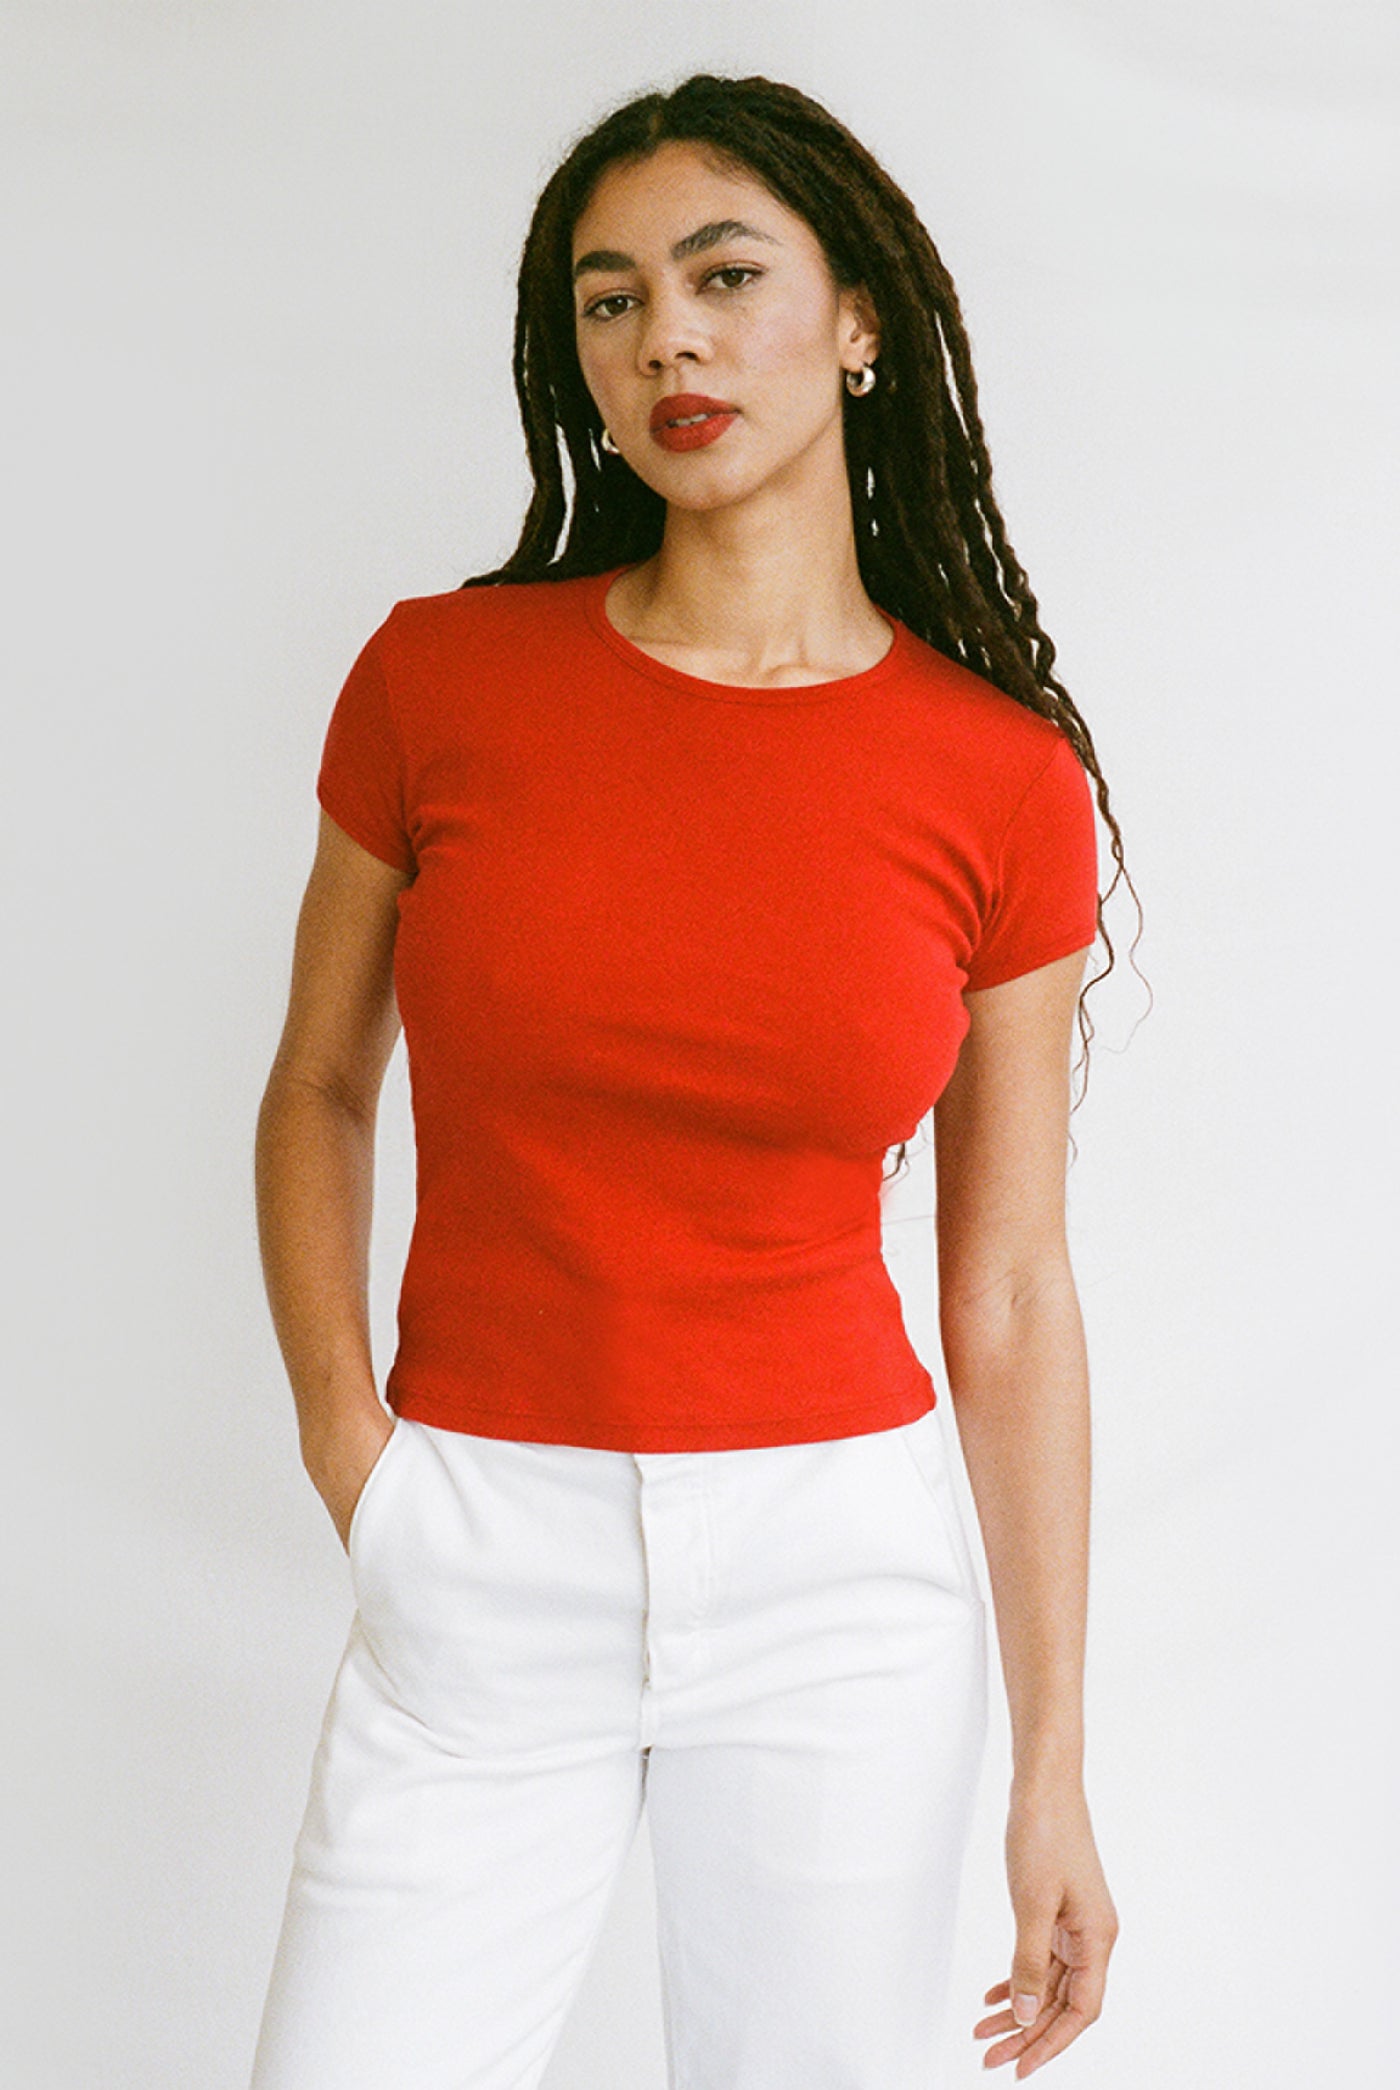 Bellevue Tee in Tomate by Gil Rodriguez